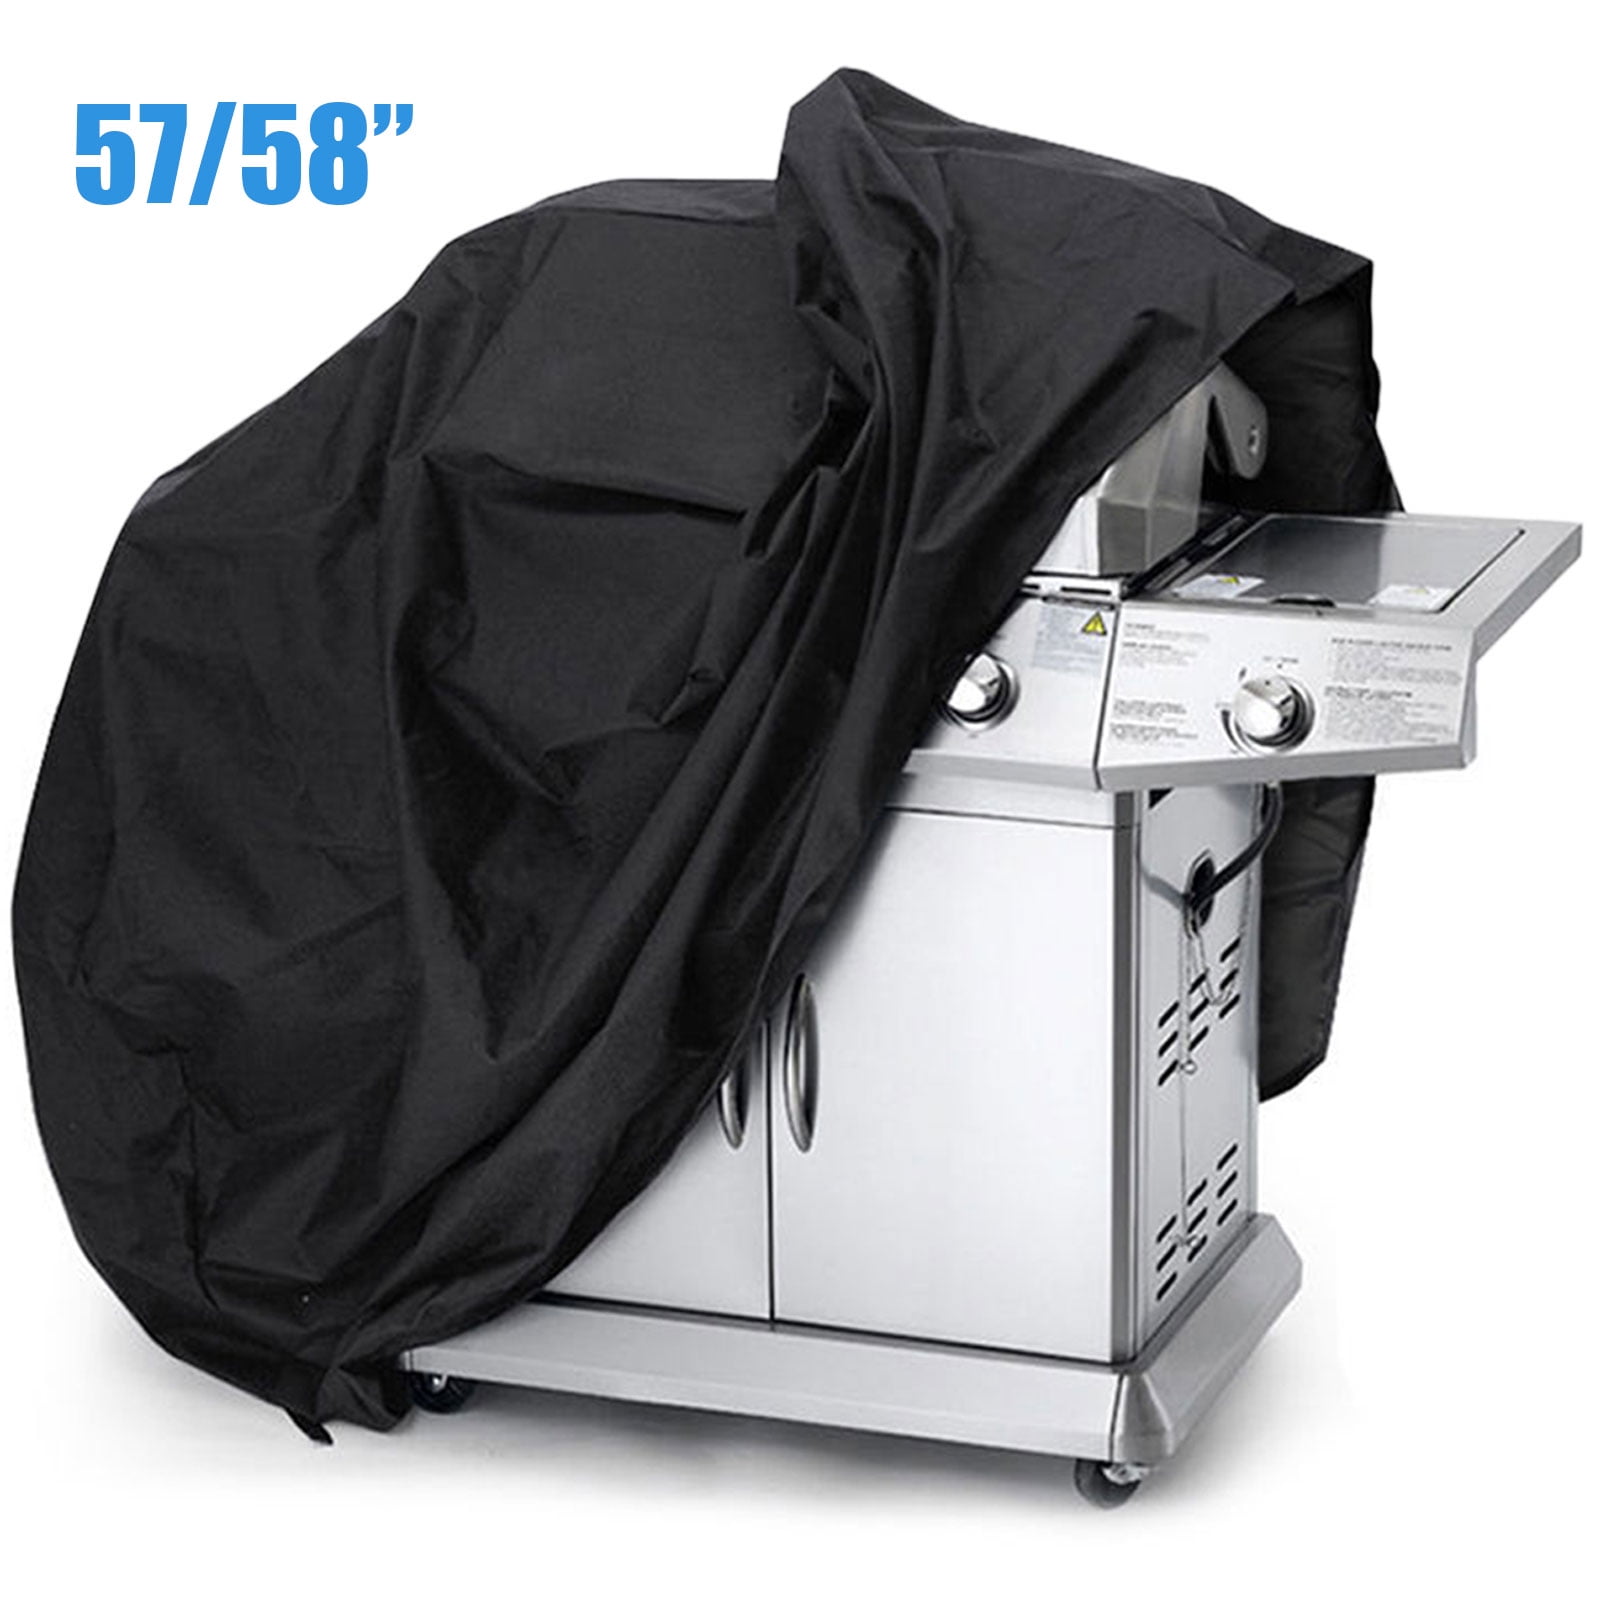 -Black Color 28x28inch Basic BBQ Grill Cover 210D Waterproof with Adjustable Cord Lock Round Grill Comily Plus